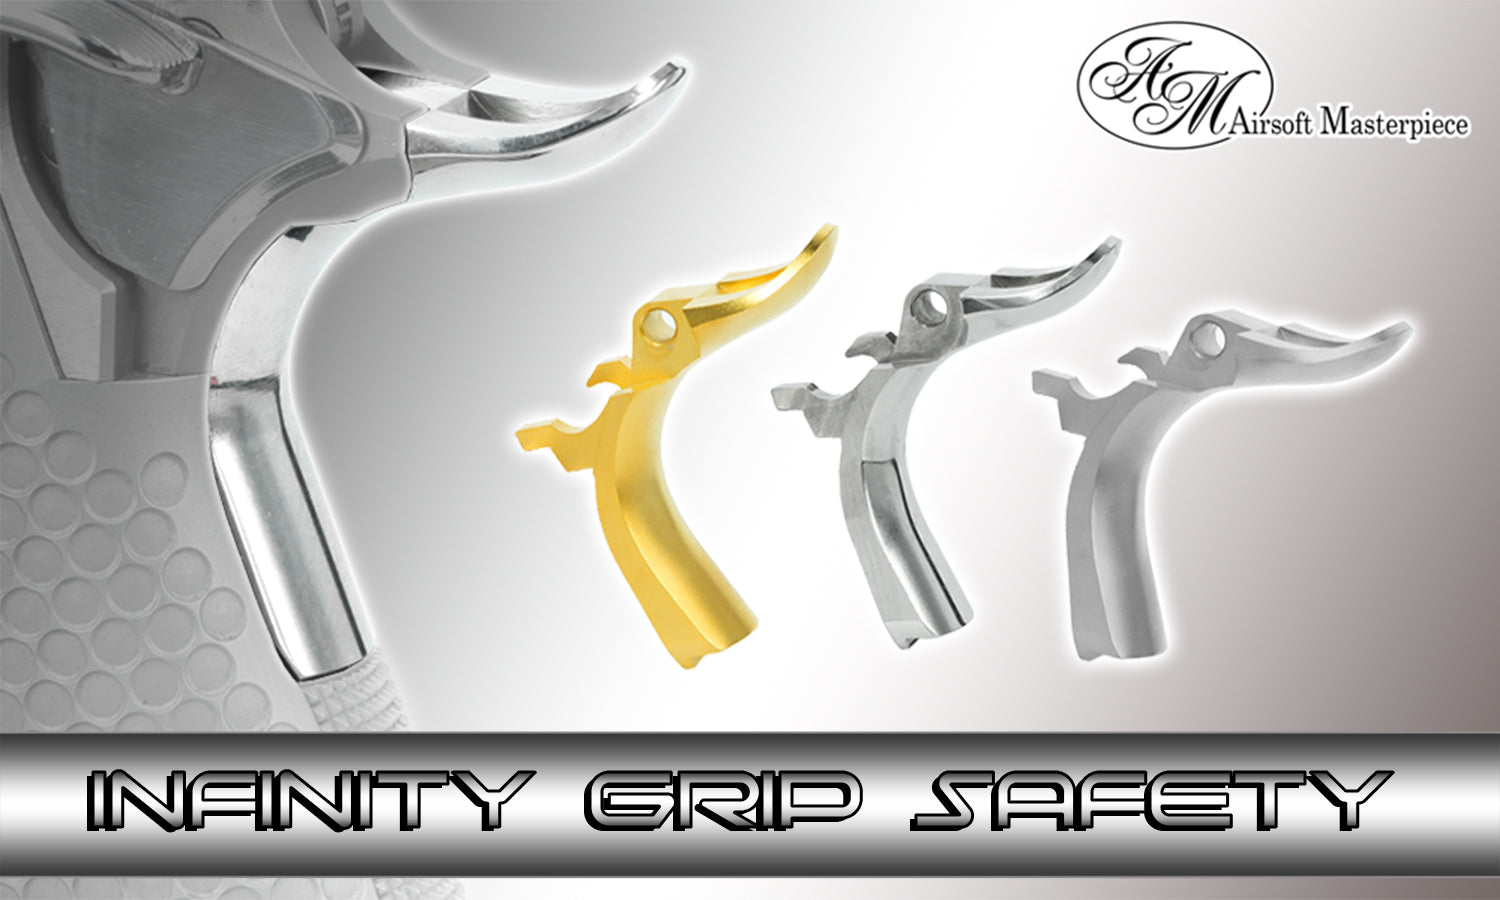 Airsoft Masterpiece Steel Grip Safety - INFINITY Signature (Gold)